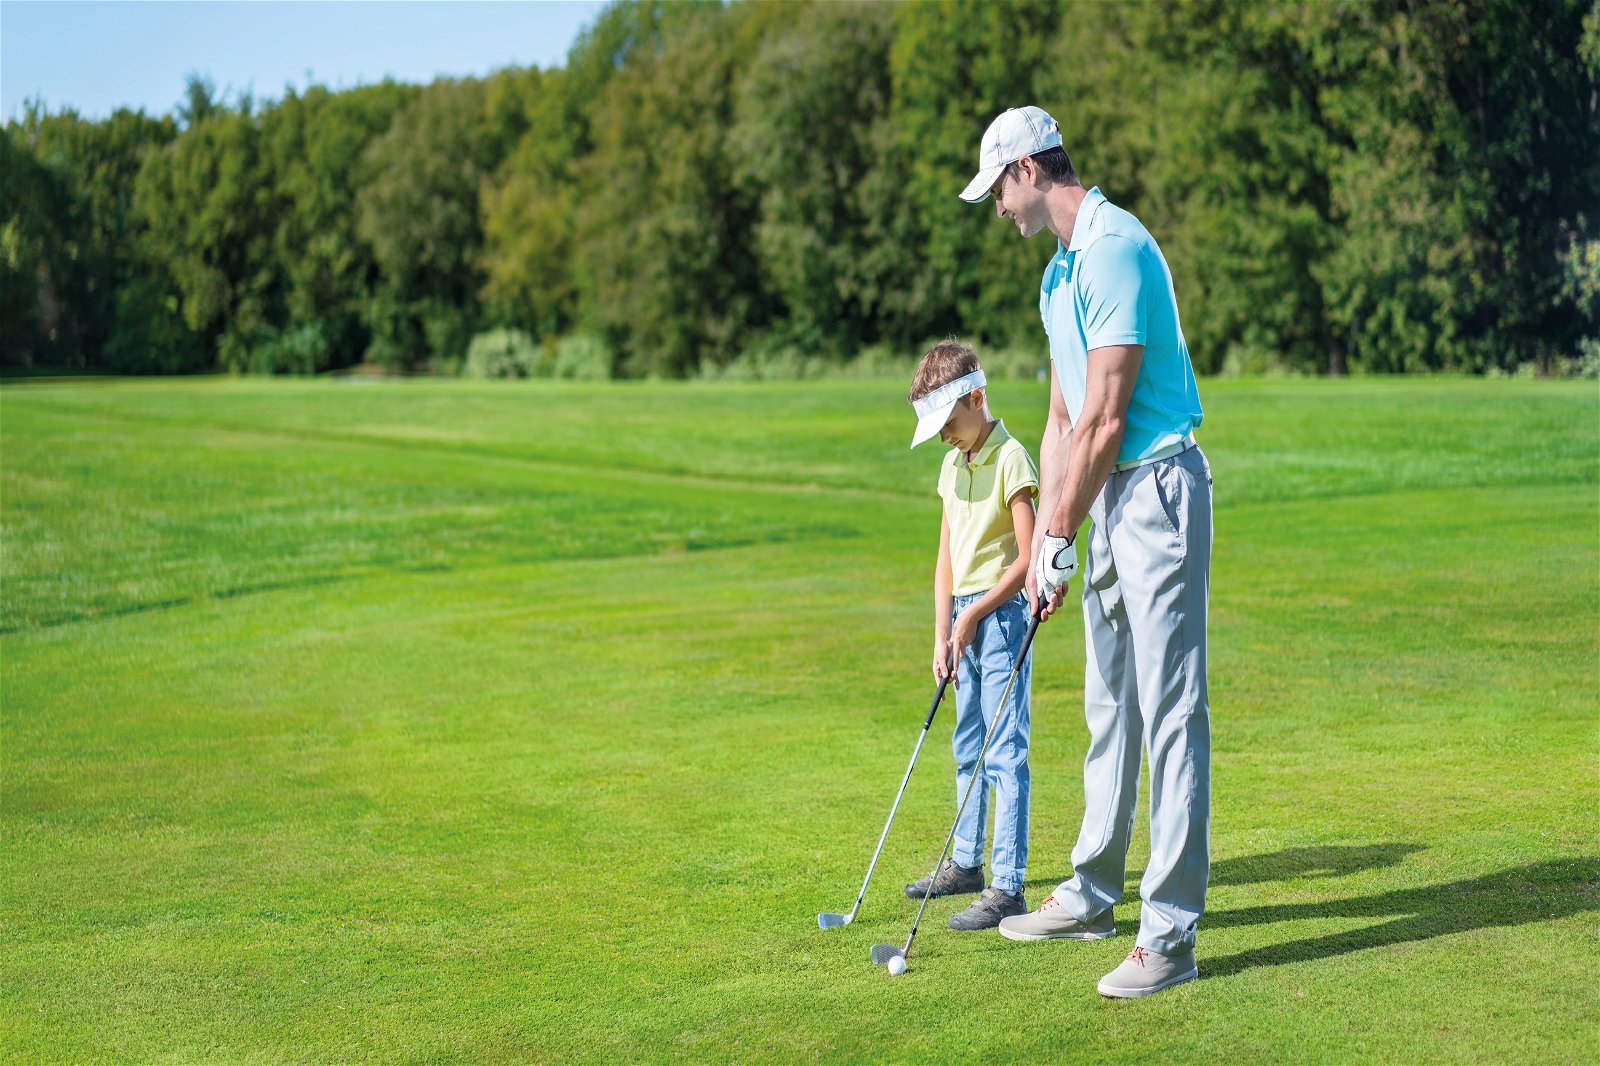 Father and son putting on golf course